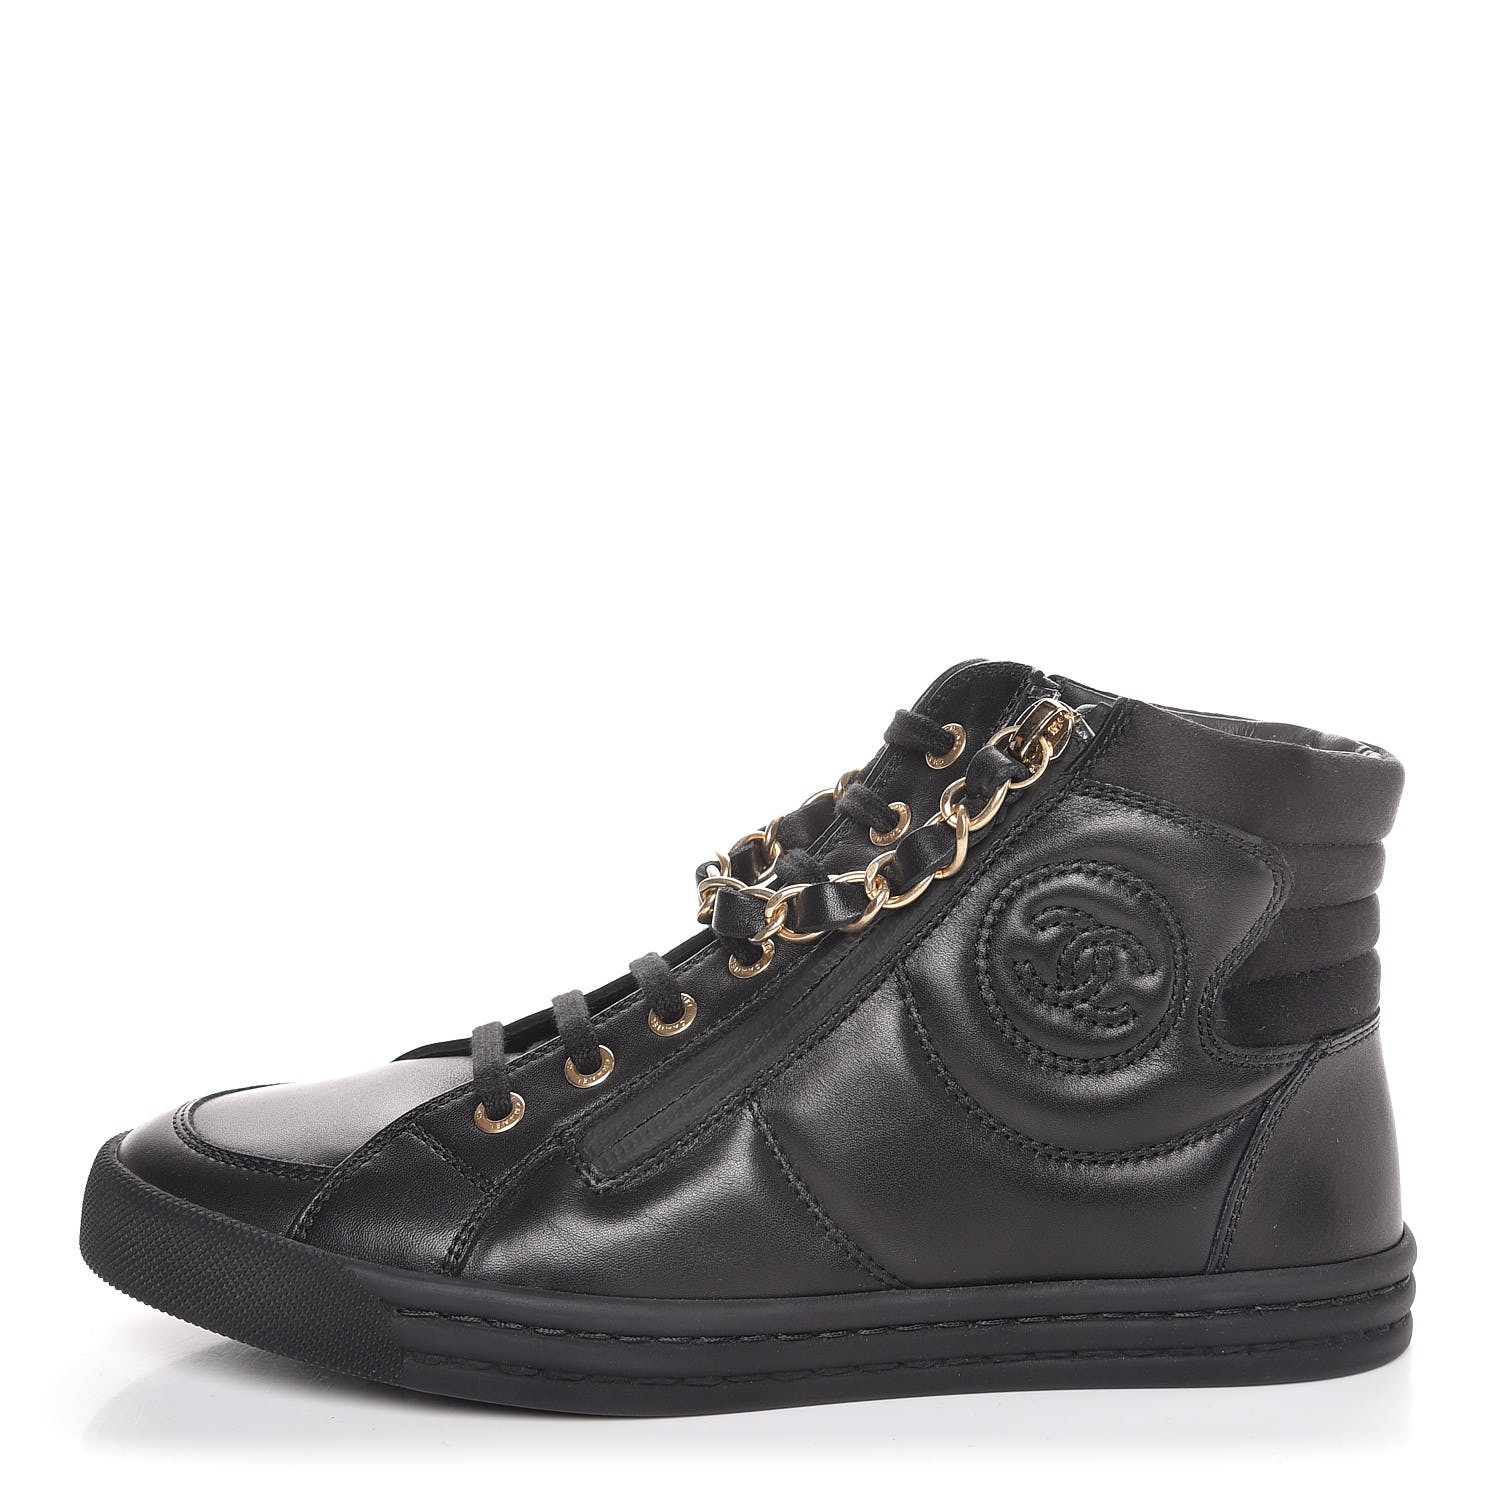 chanel satin sneakers